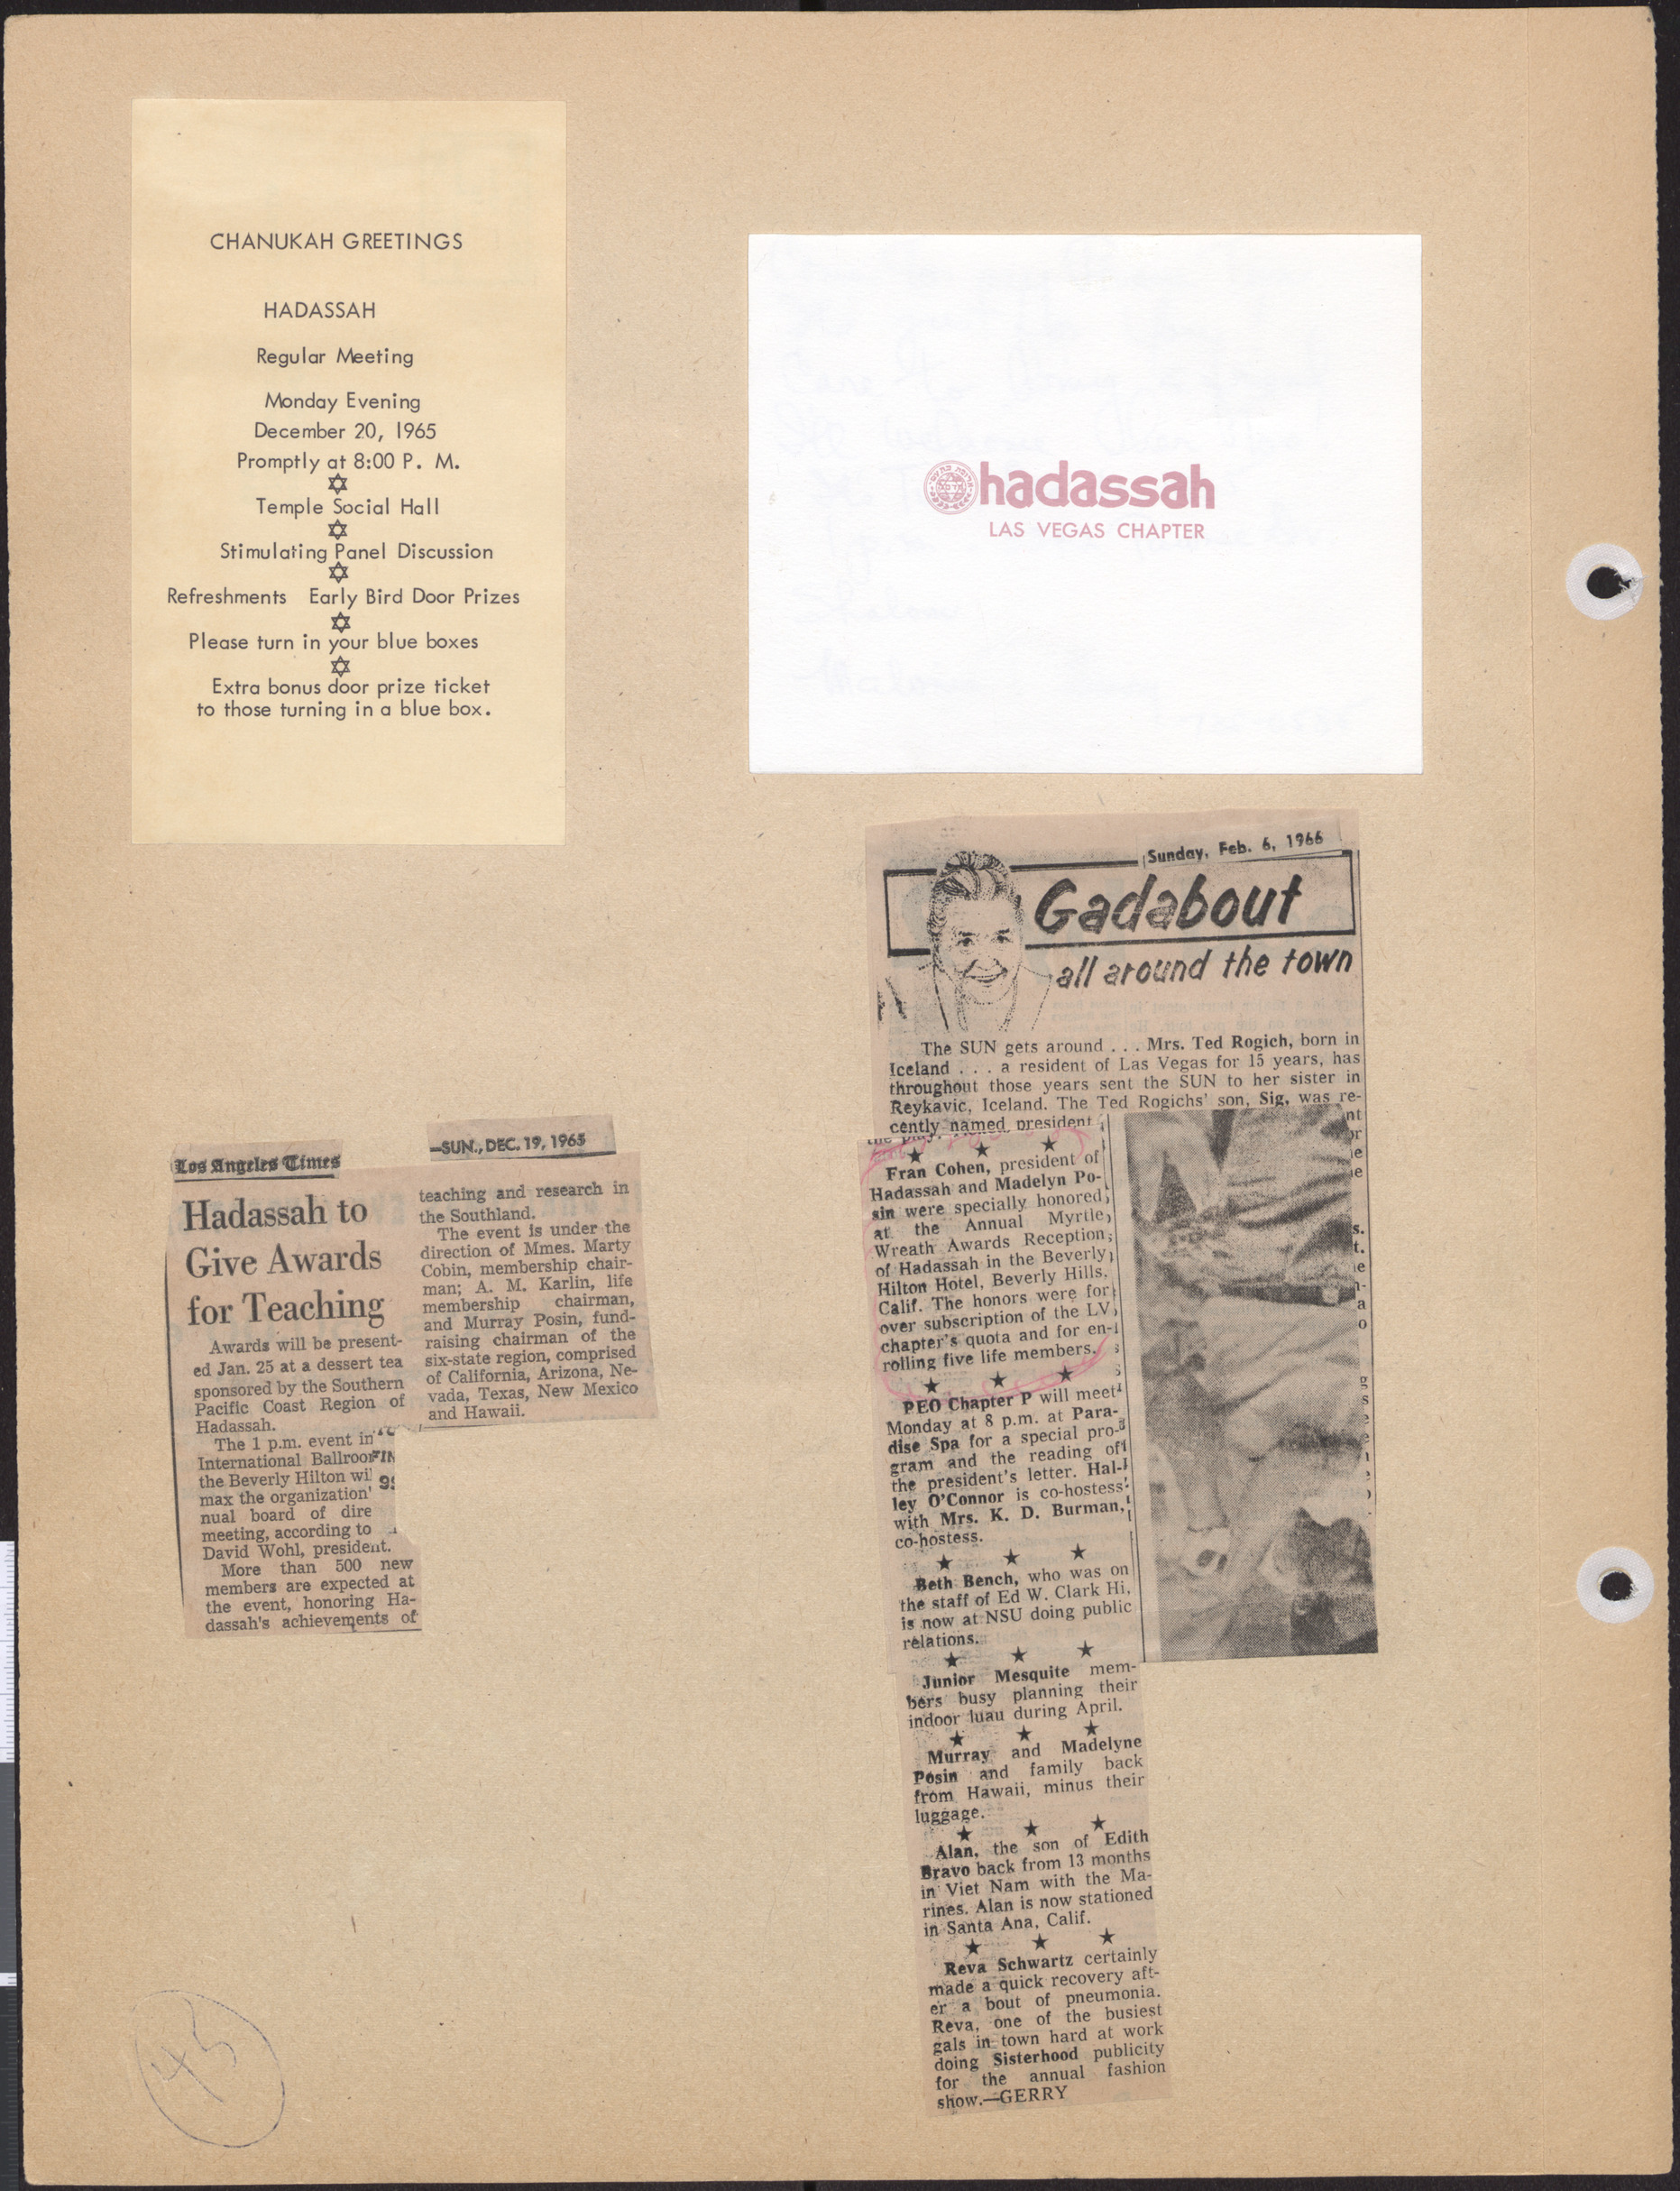 Hadassah meeting announcement, December 20, 1965, and Hadassah note card, and newspaper clippings about Hadassah awards and honors, 1965